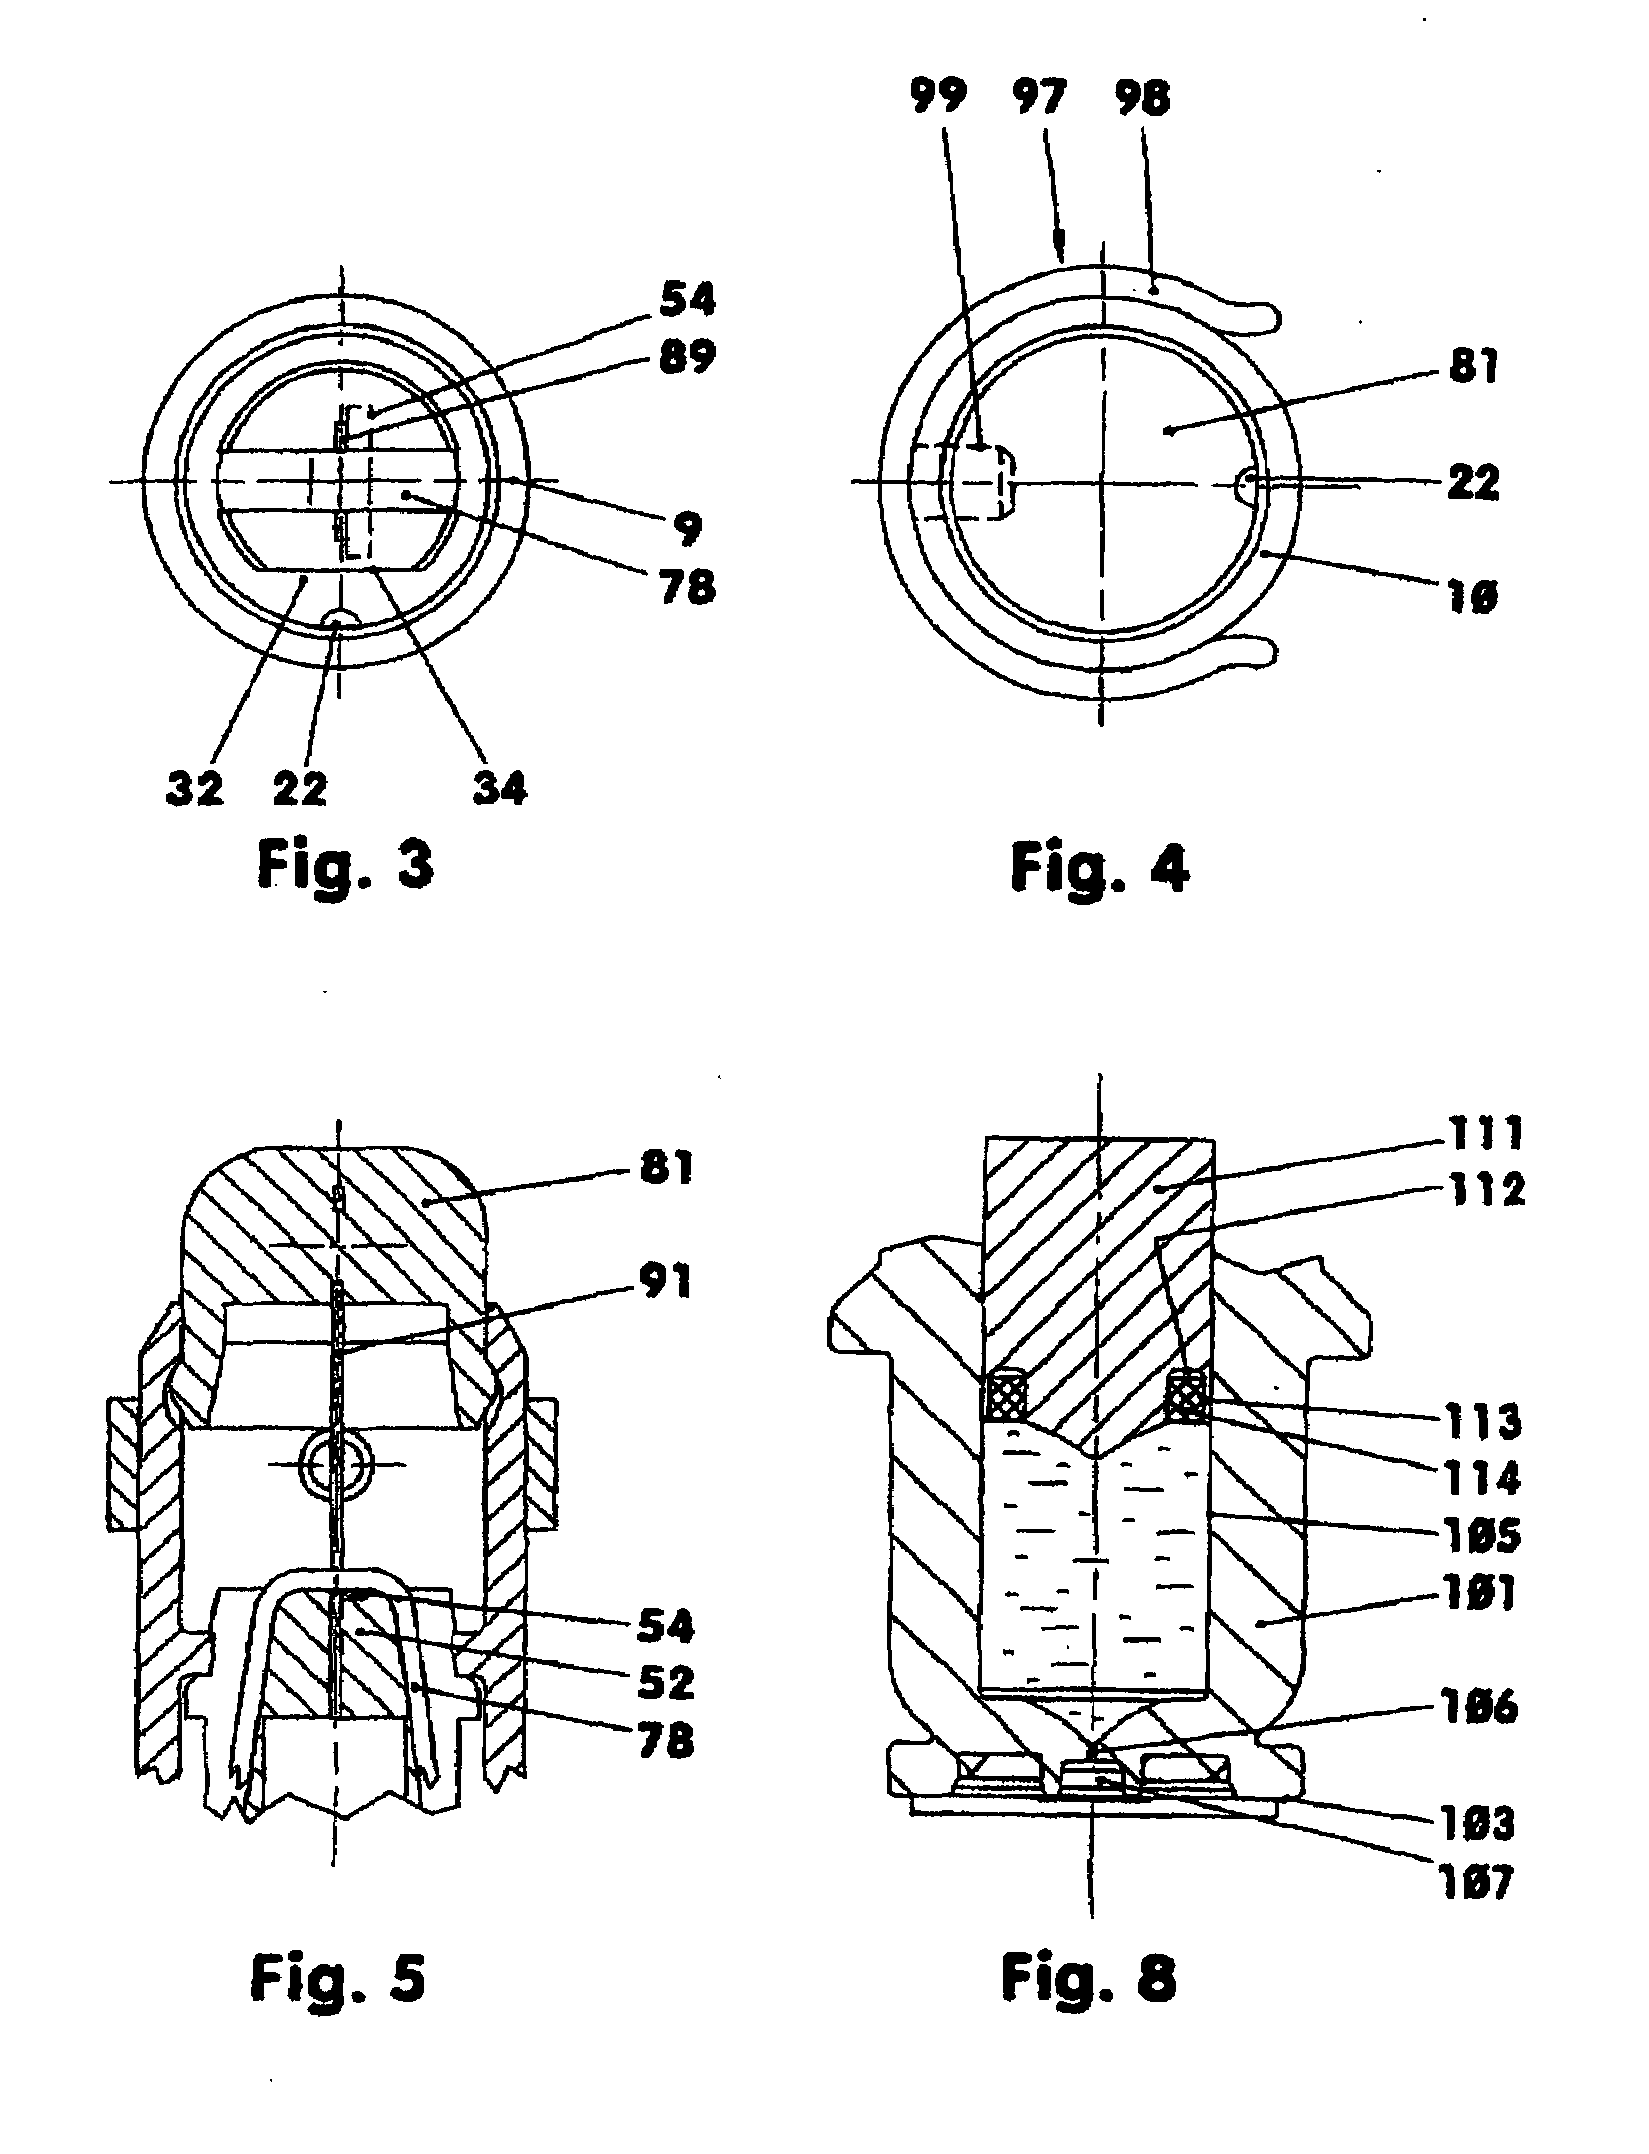 One-way injector with continuously charged spring energy store